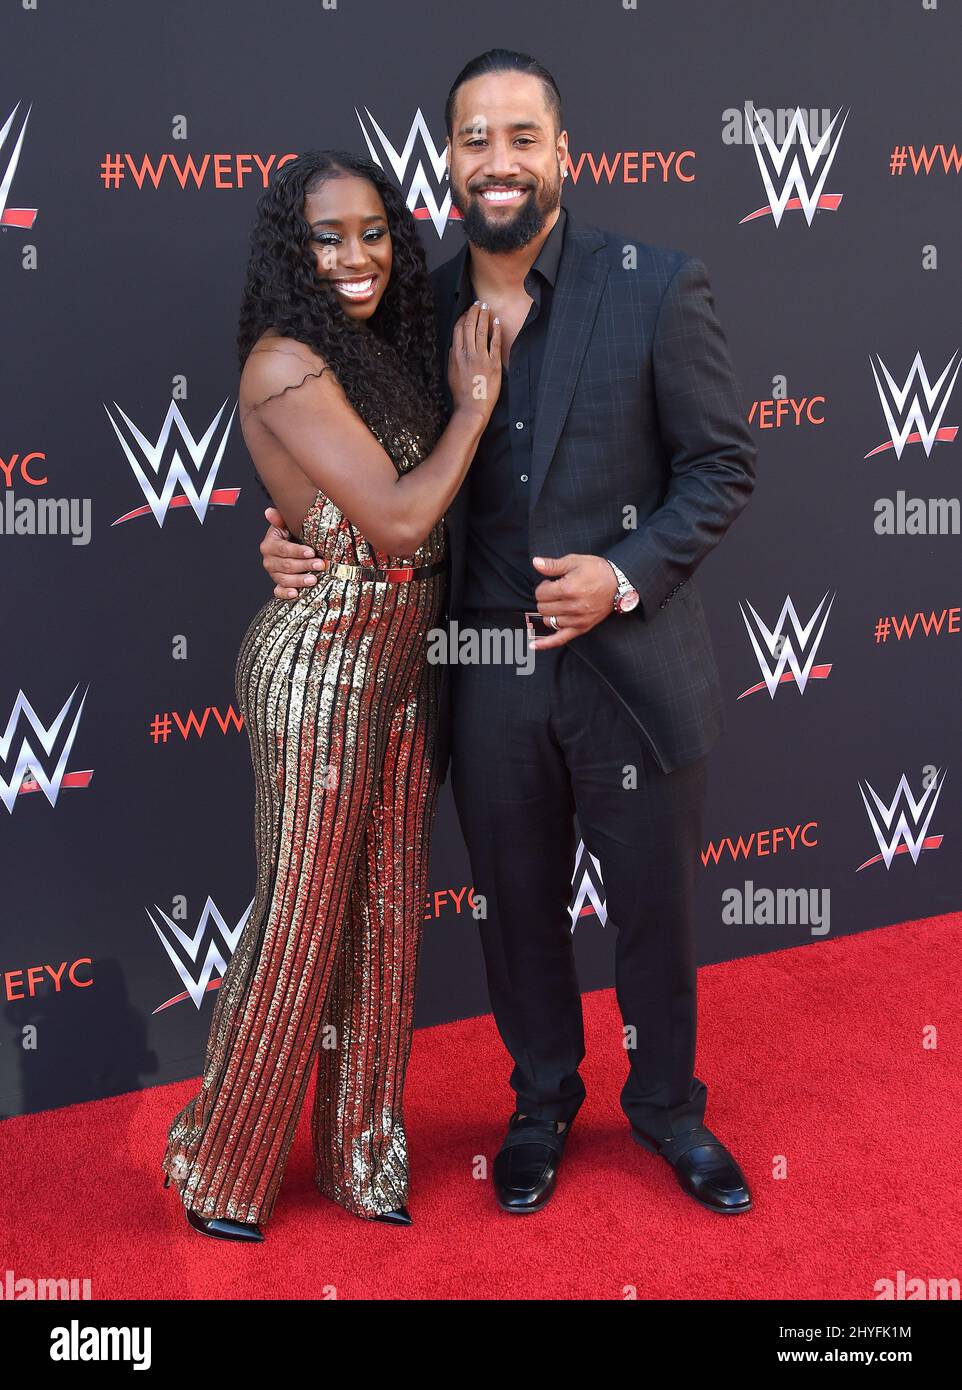 Naomi and Jimmy Uso at the WWE FYC Event event at TV Academy Saban Media Center on June 6, 2018 in North Hollywood, CA Stock Photo